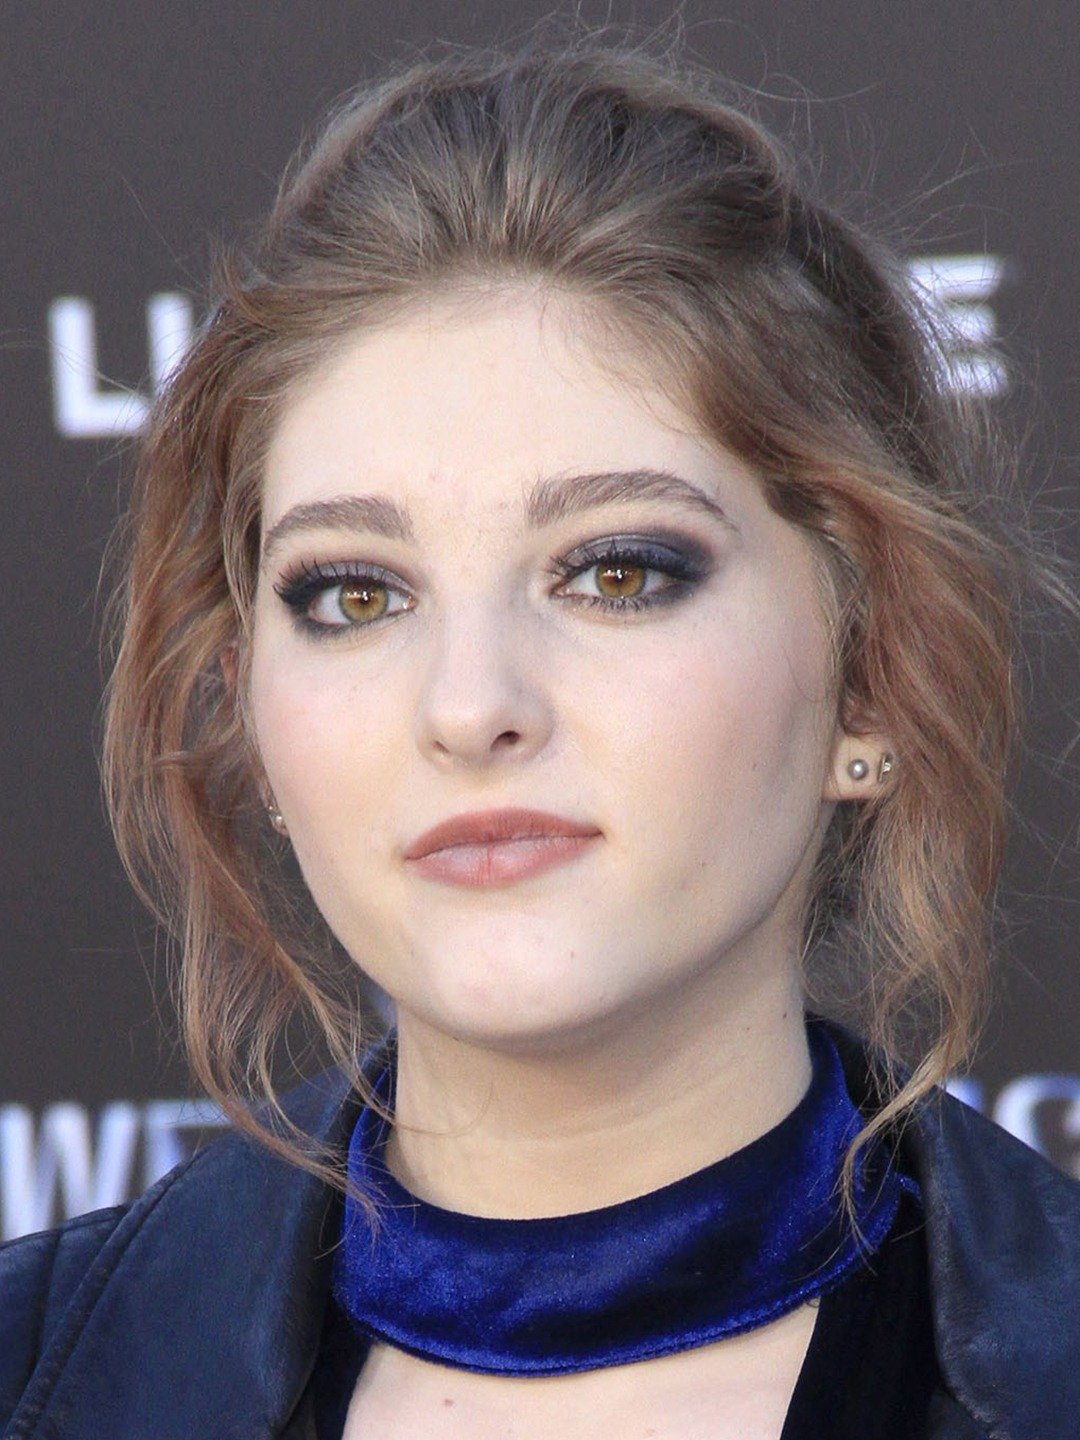 How tall is Willow Shields?